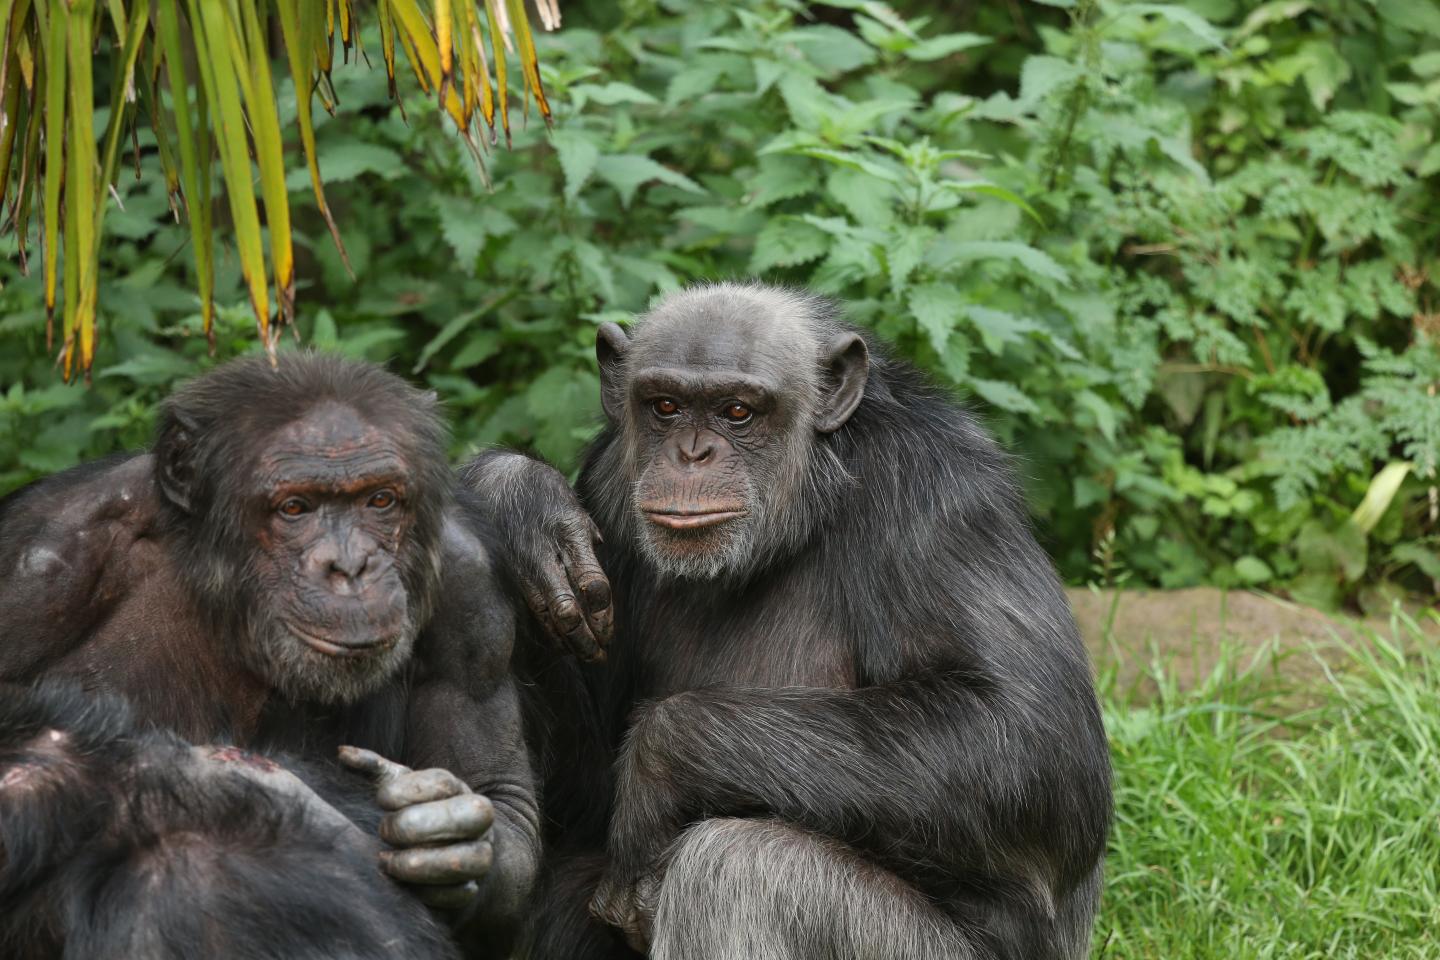 Apes sit closely together on the ground